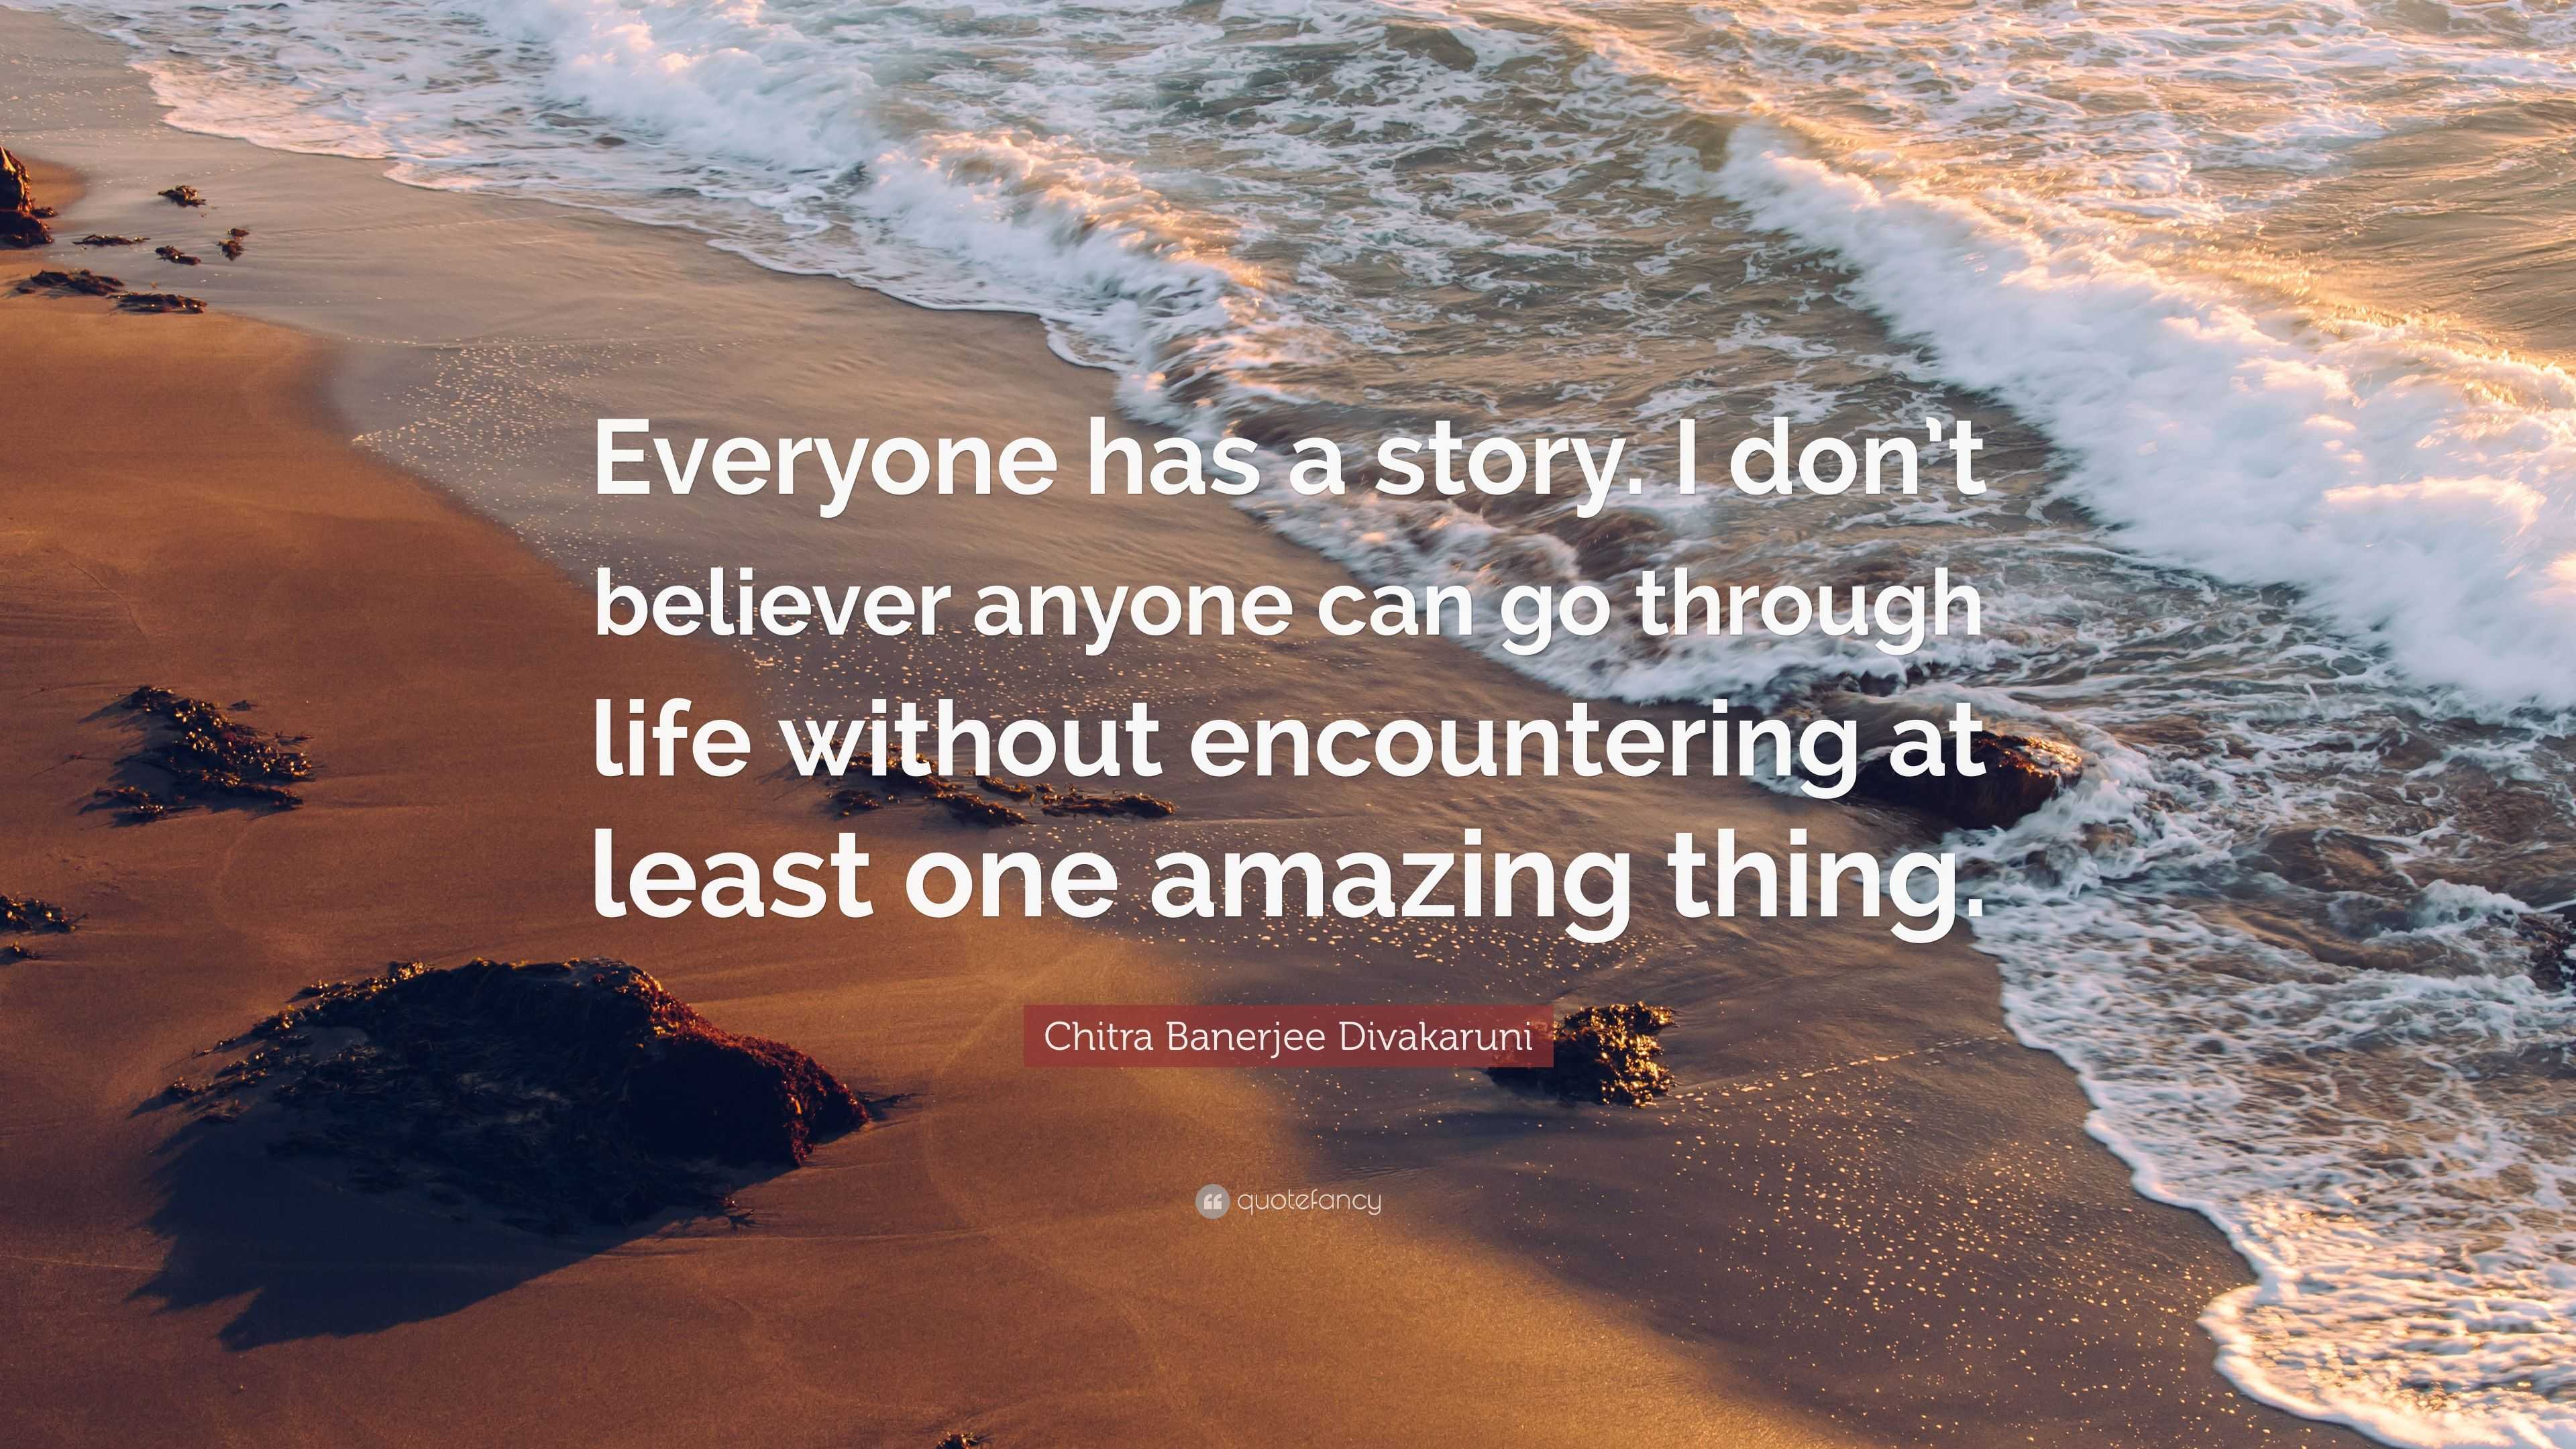 everyone has a story. one amazing thing